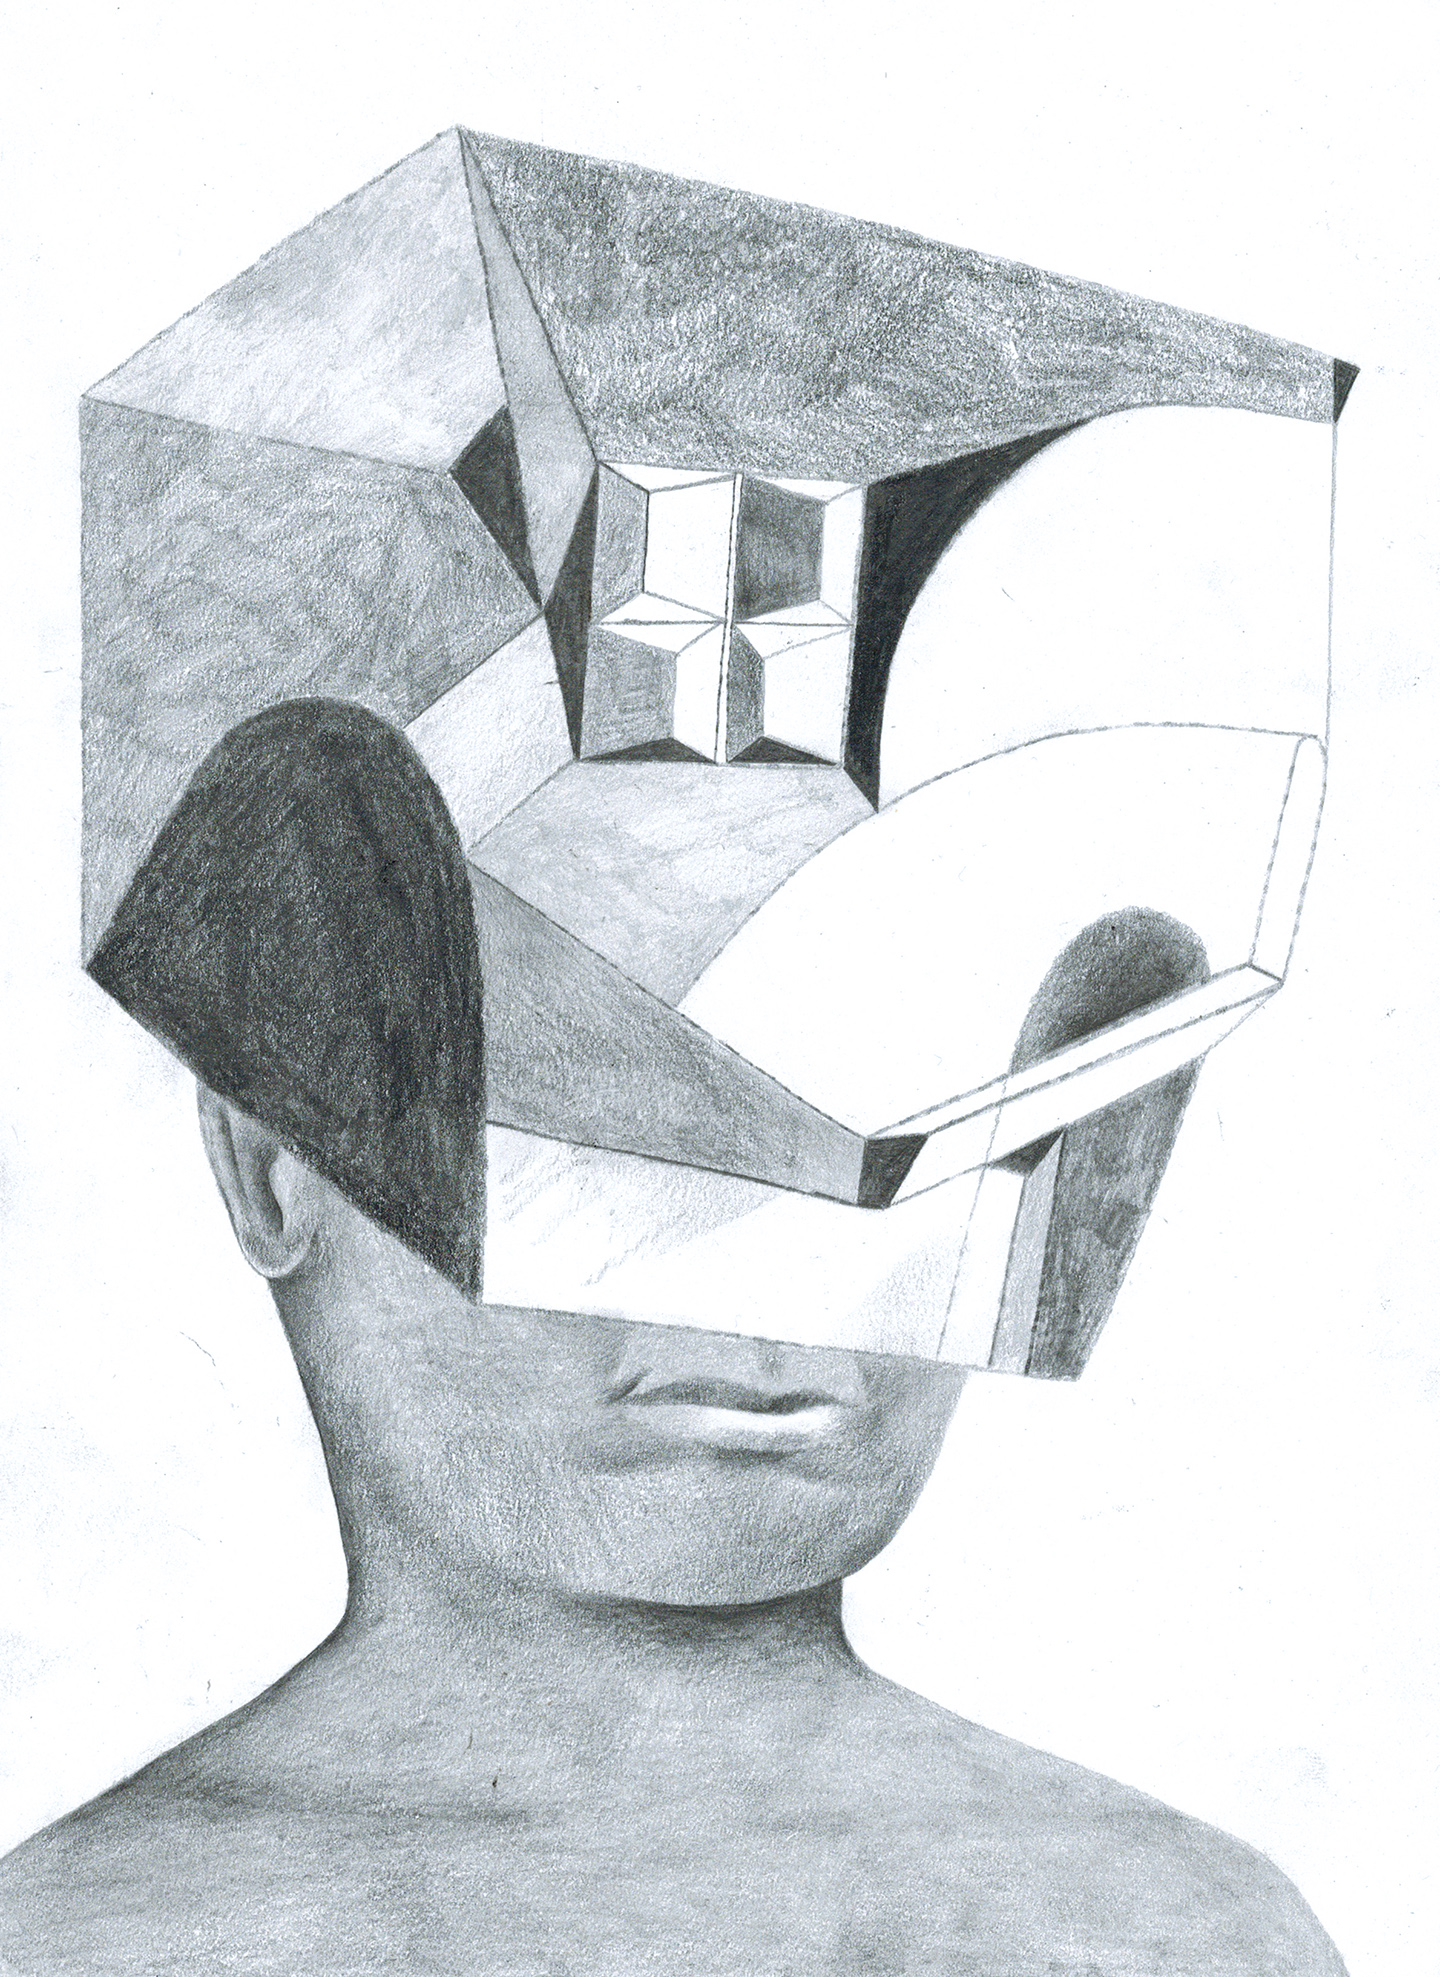 Kenny_Rivero-20_The_Young_Lord_The_Mighty_Abstract__2015_Graphite_on_paper